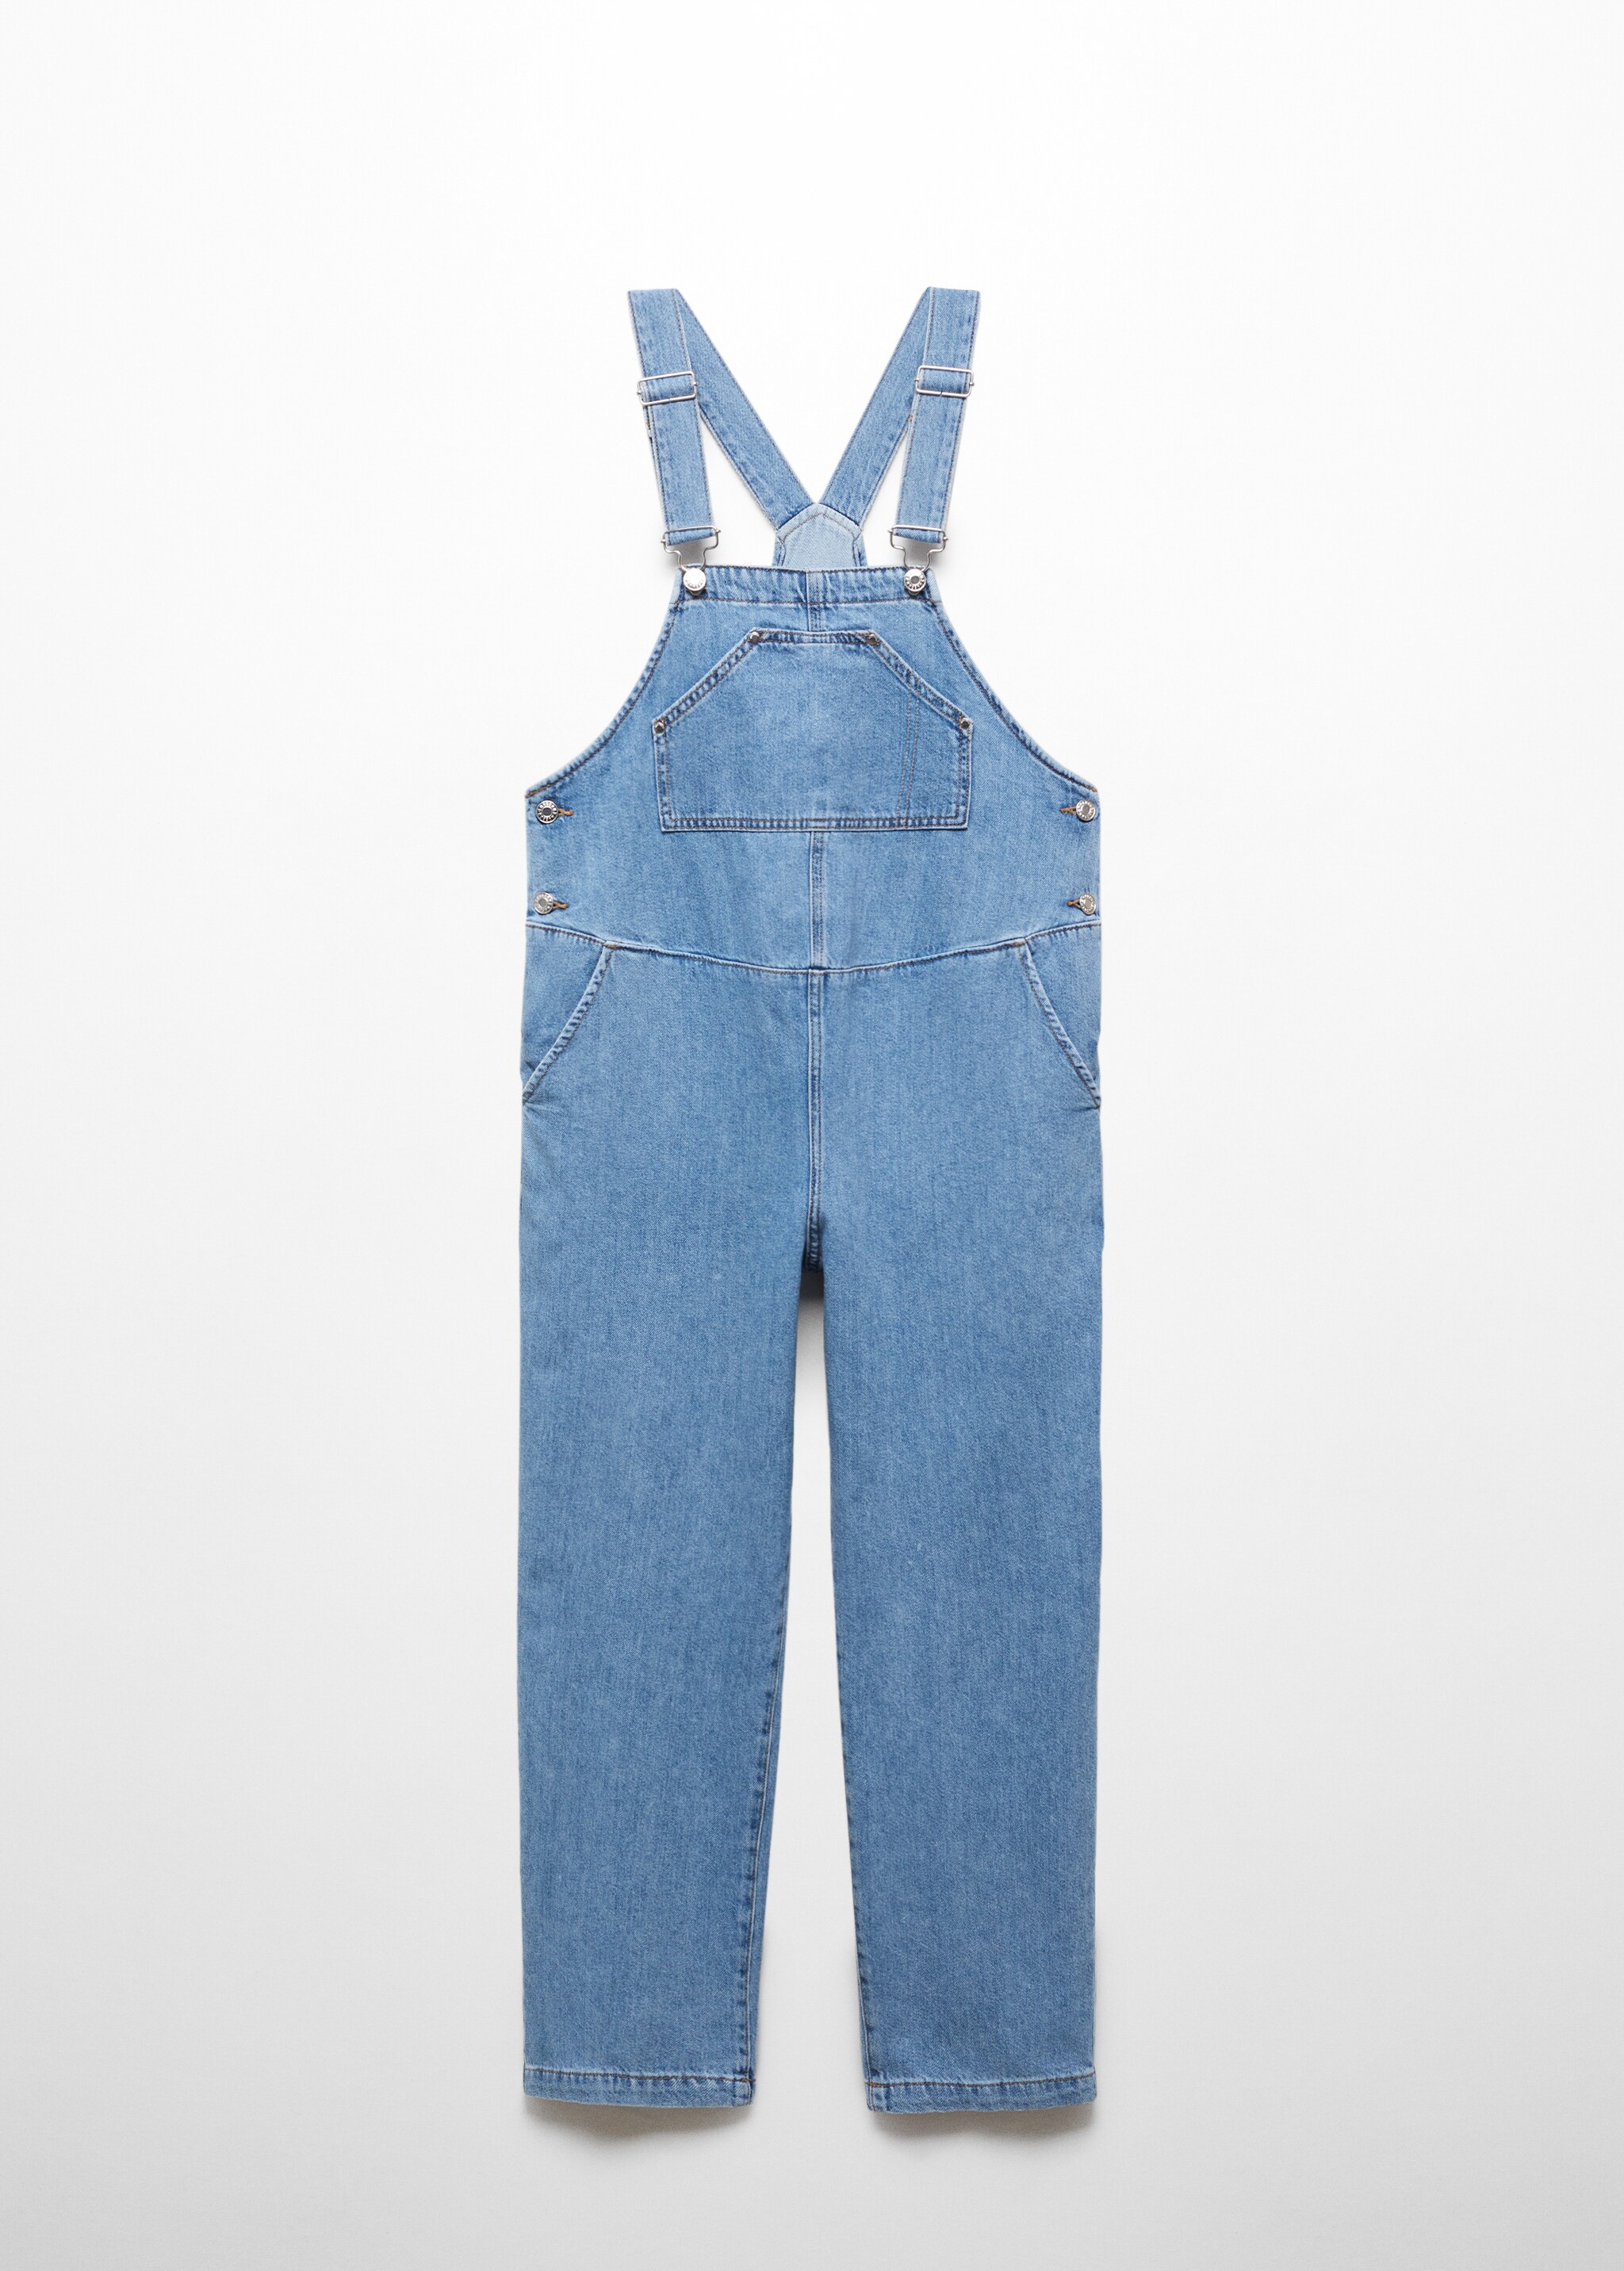 Maternity denim dungarees - Article without model